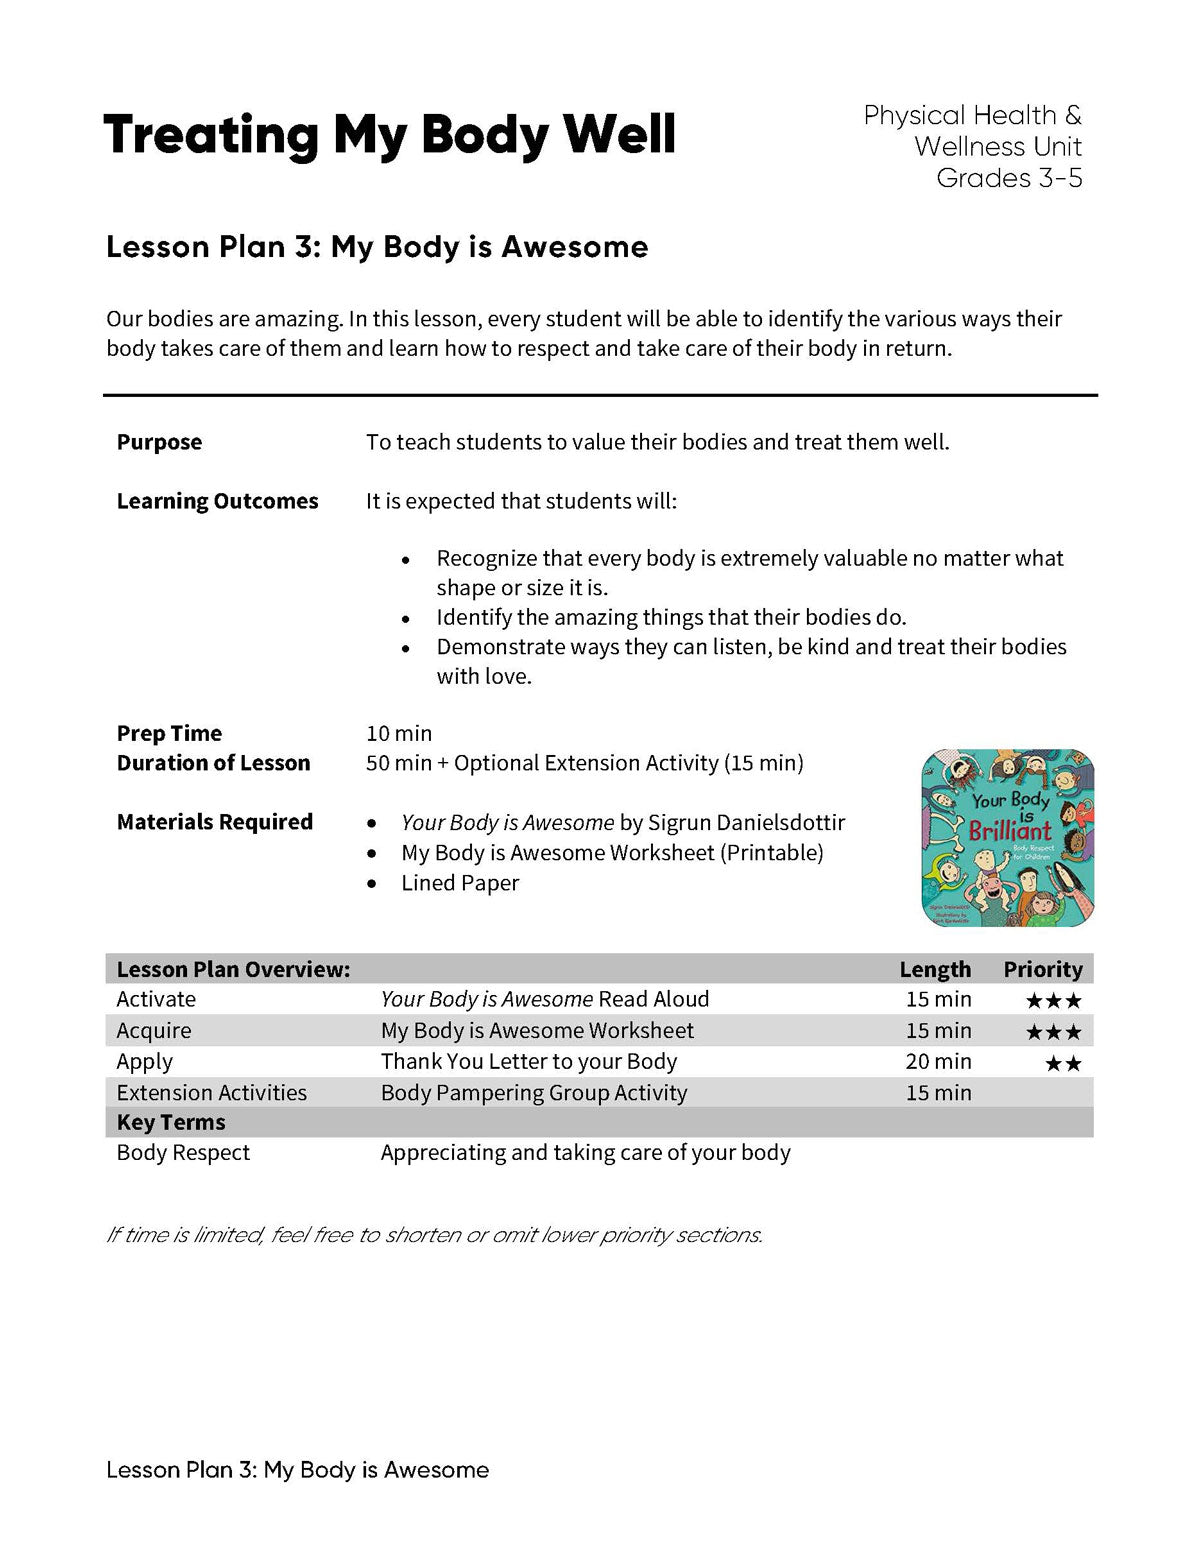 Lesson Plan 3: My Body is Awesome